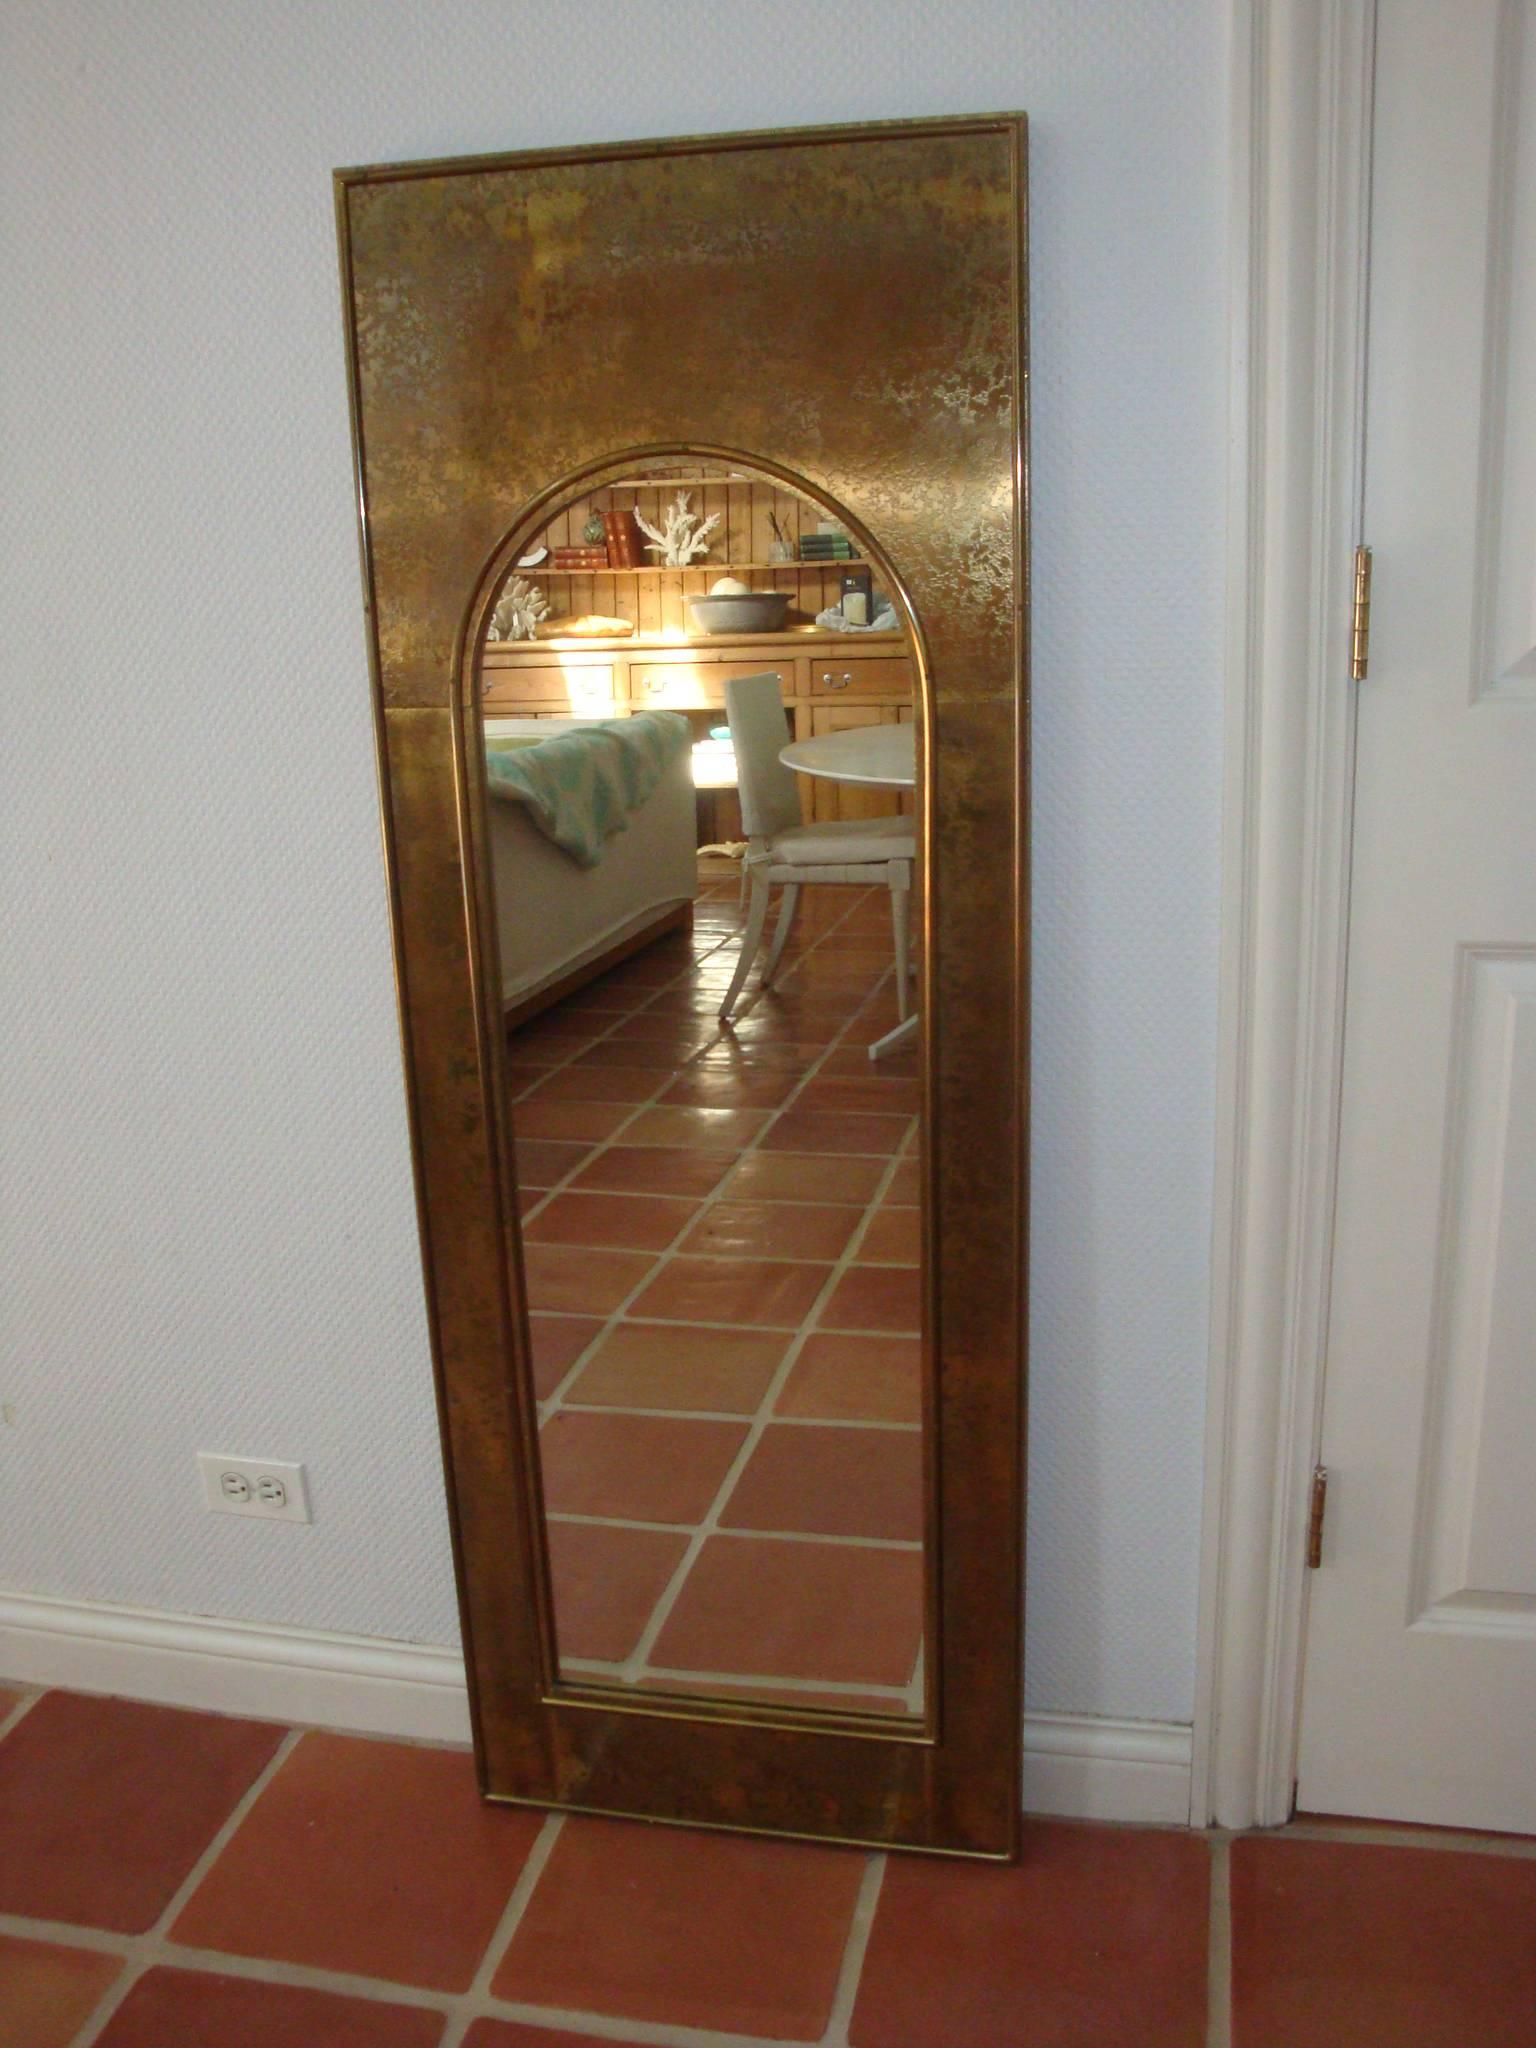 This is a brass clad mirror by Mastercraft from 1970s 